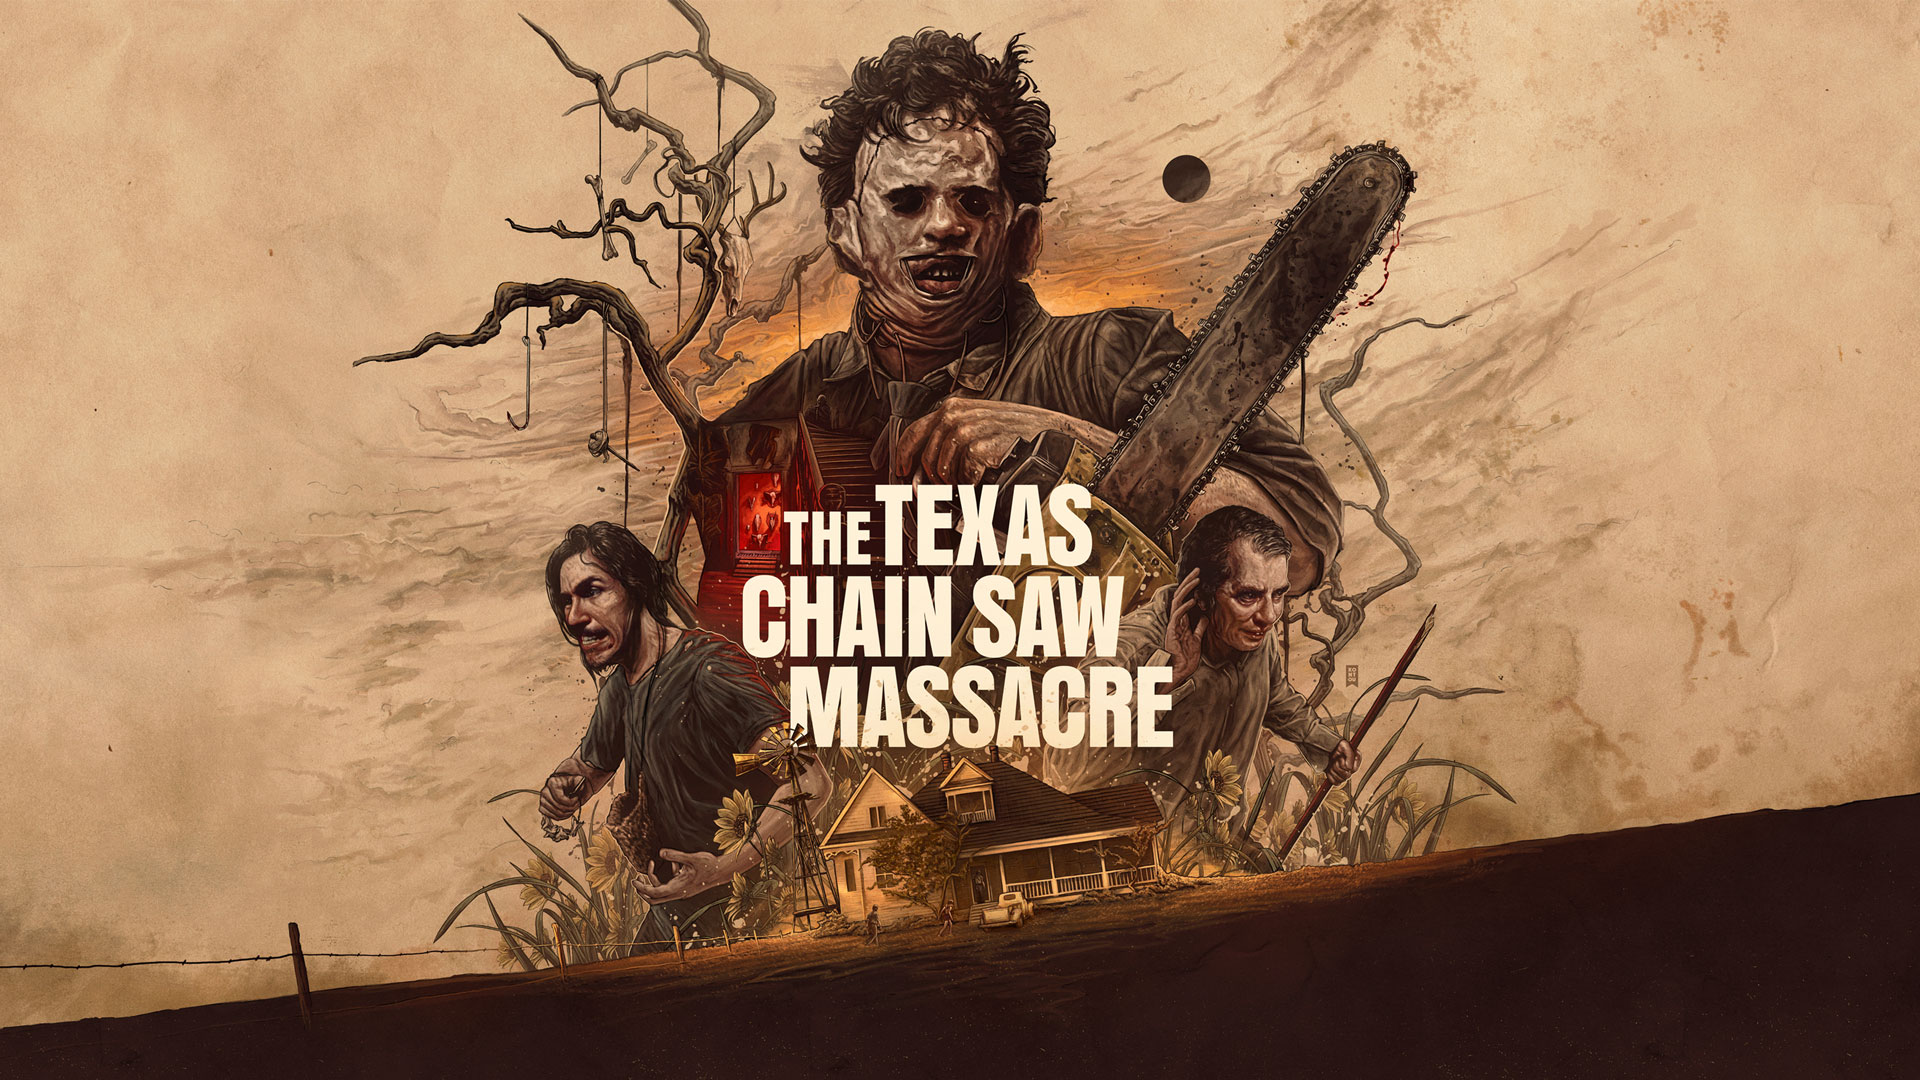 Video For The Texas Chain Saw Massacre Gameplay Reveal and Details